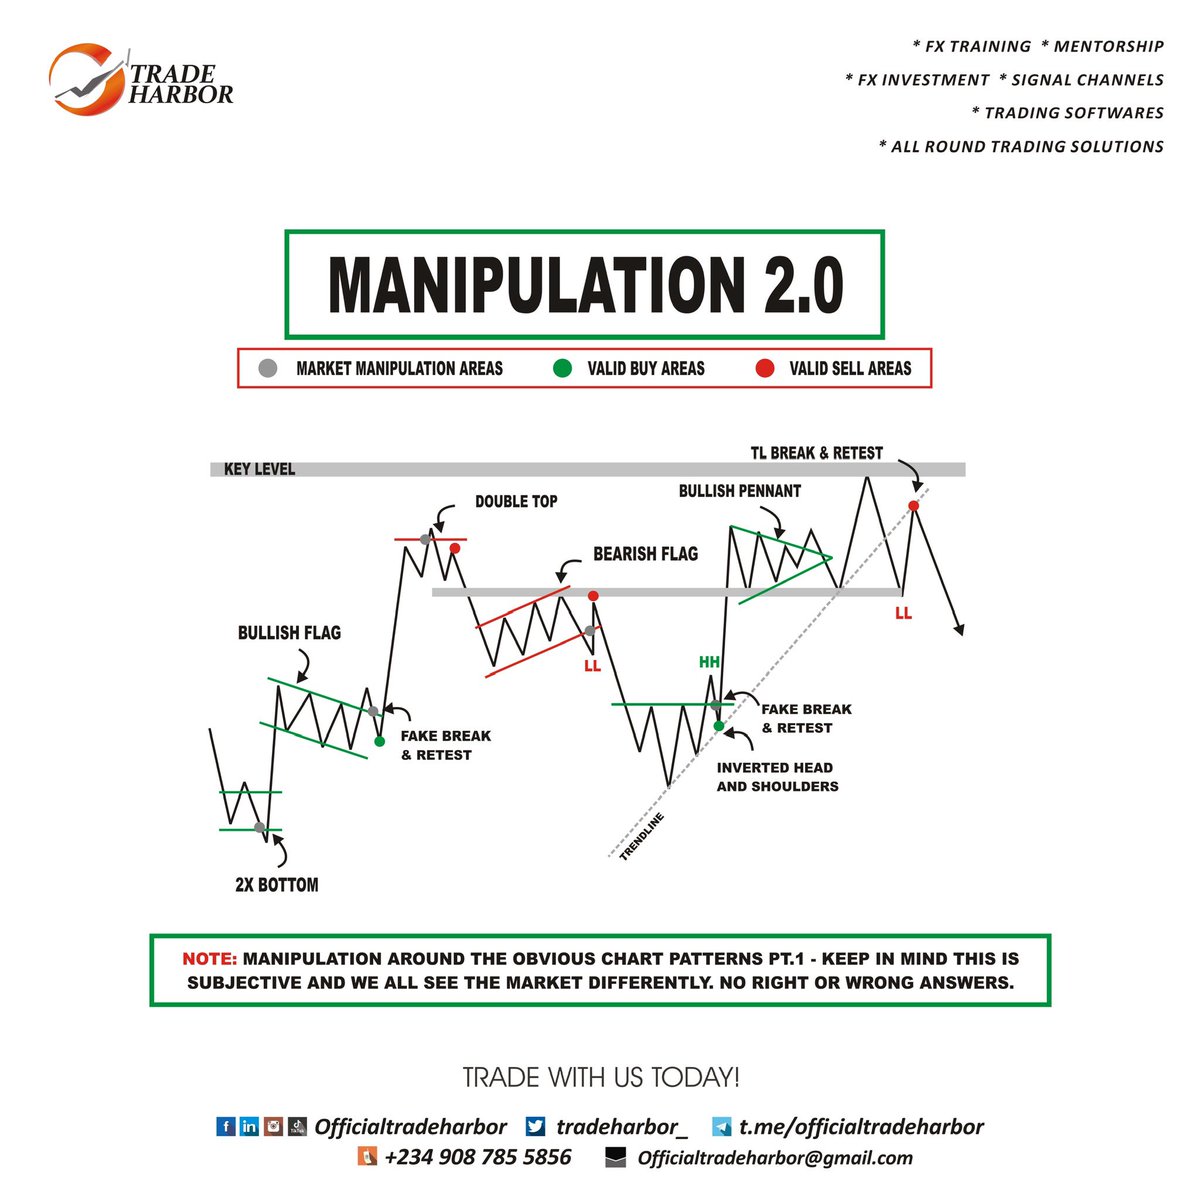 Manipulation 2.0 📊 

#ForexTrading #CurrencyMarkets #ForexAnalysis #FXSignals #TradingStrategy #ForexNews #CurrencyPairs #FXMarket #TradingTips #ForexCommunity #pips